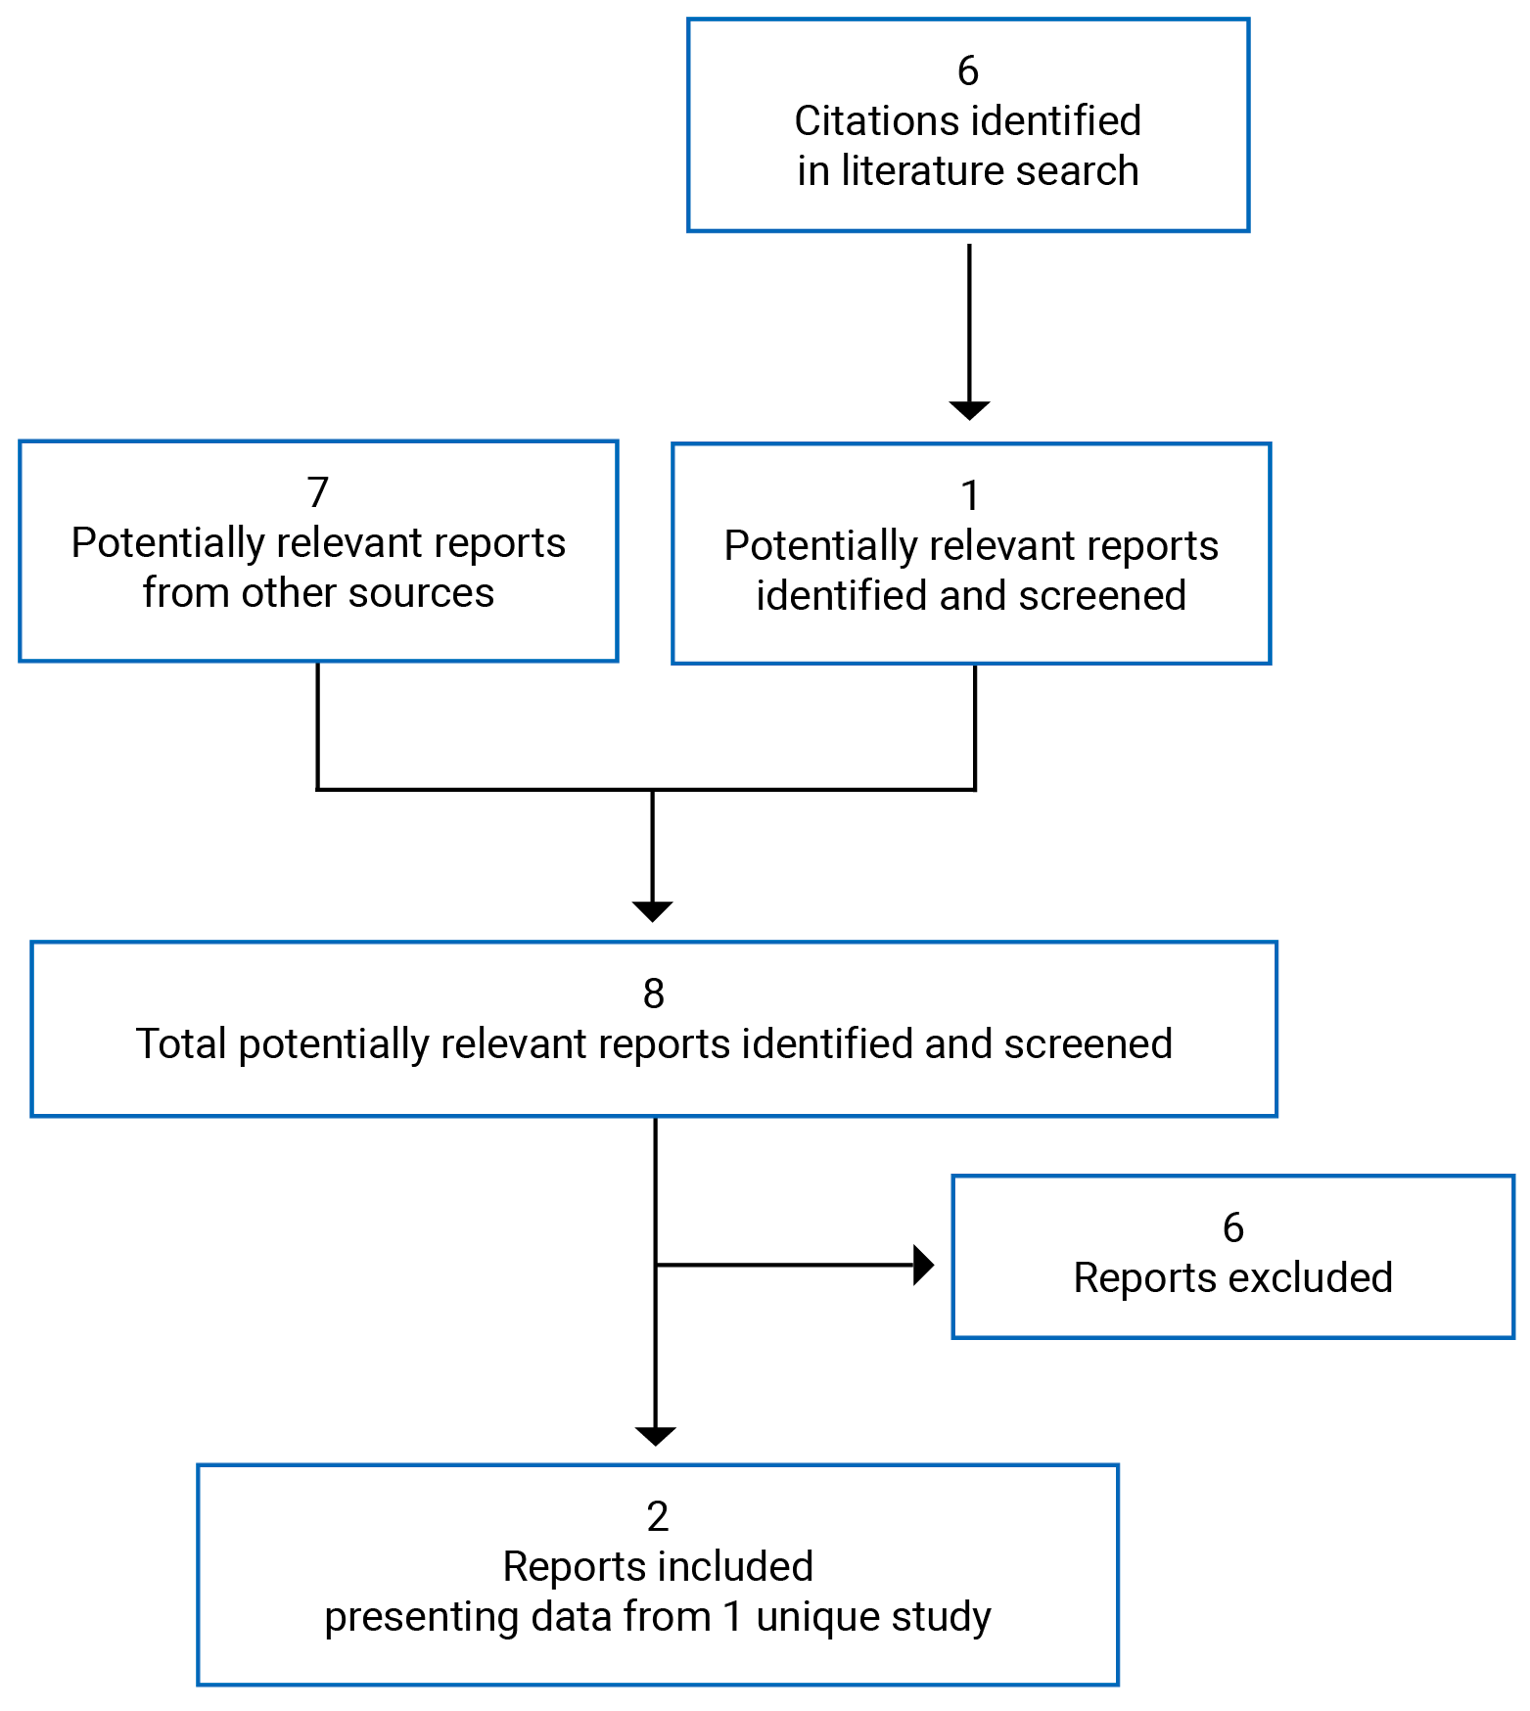 Six citations were identified, of which 5 were excluded, and 7 electronic literature and grey literature potentially relevant full-text reports were retrieved for scrutiny. In total, 2 reports form 1 unique study were included in the review.